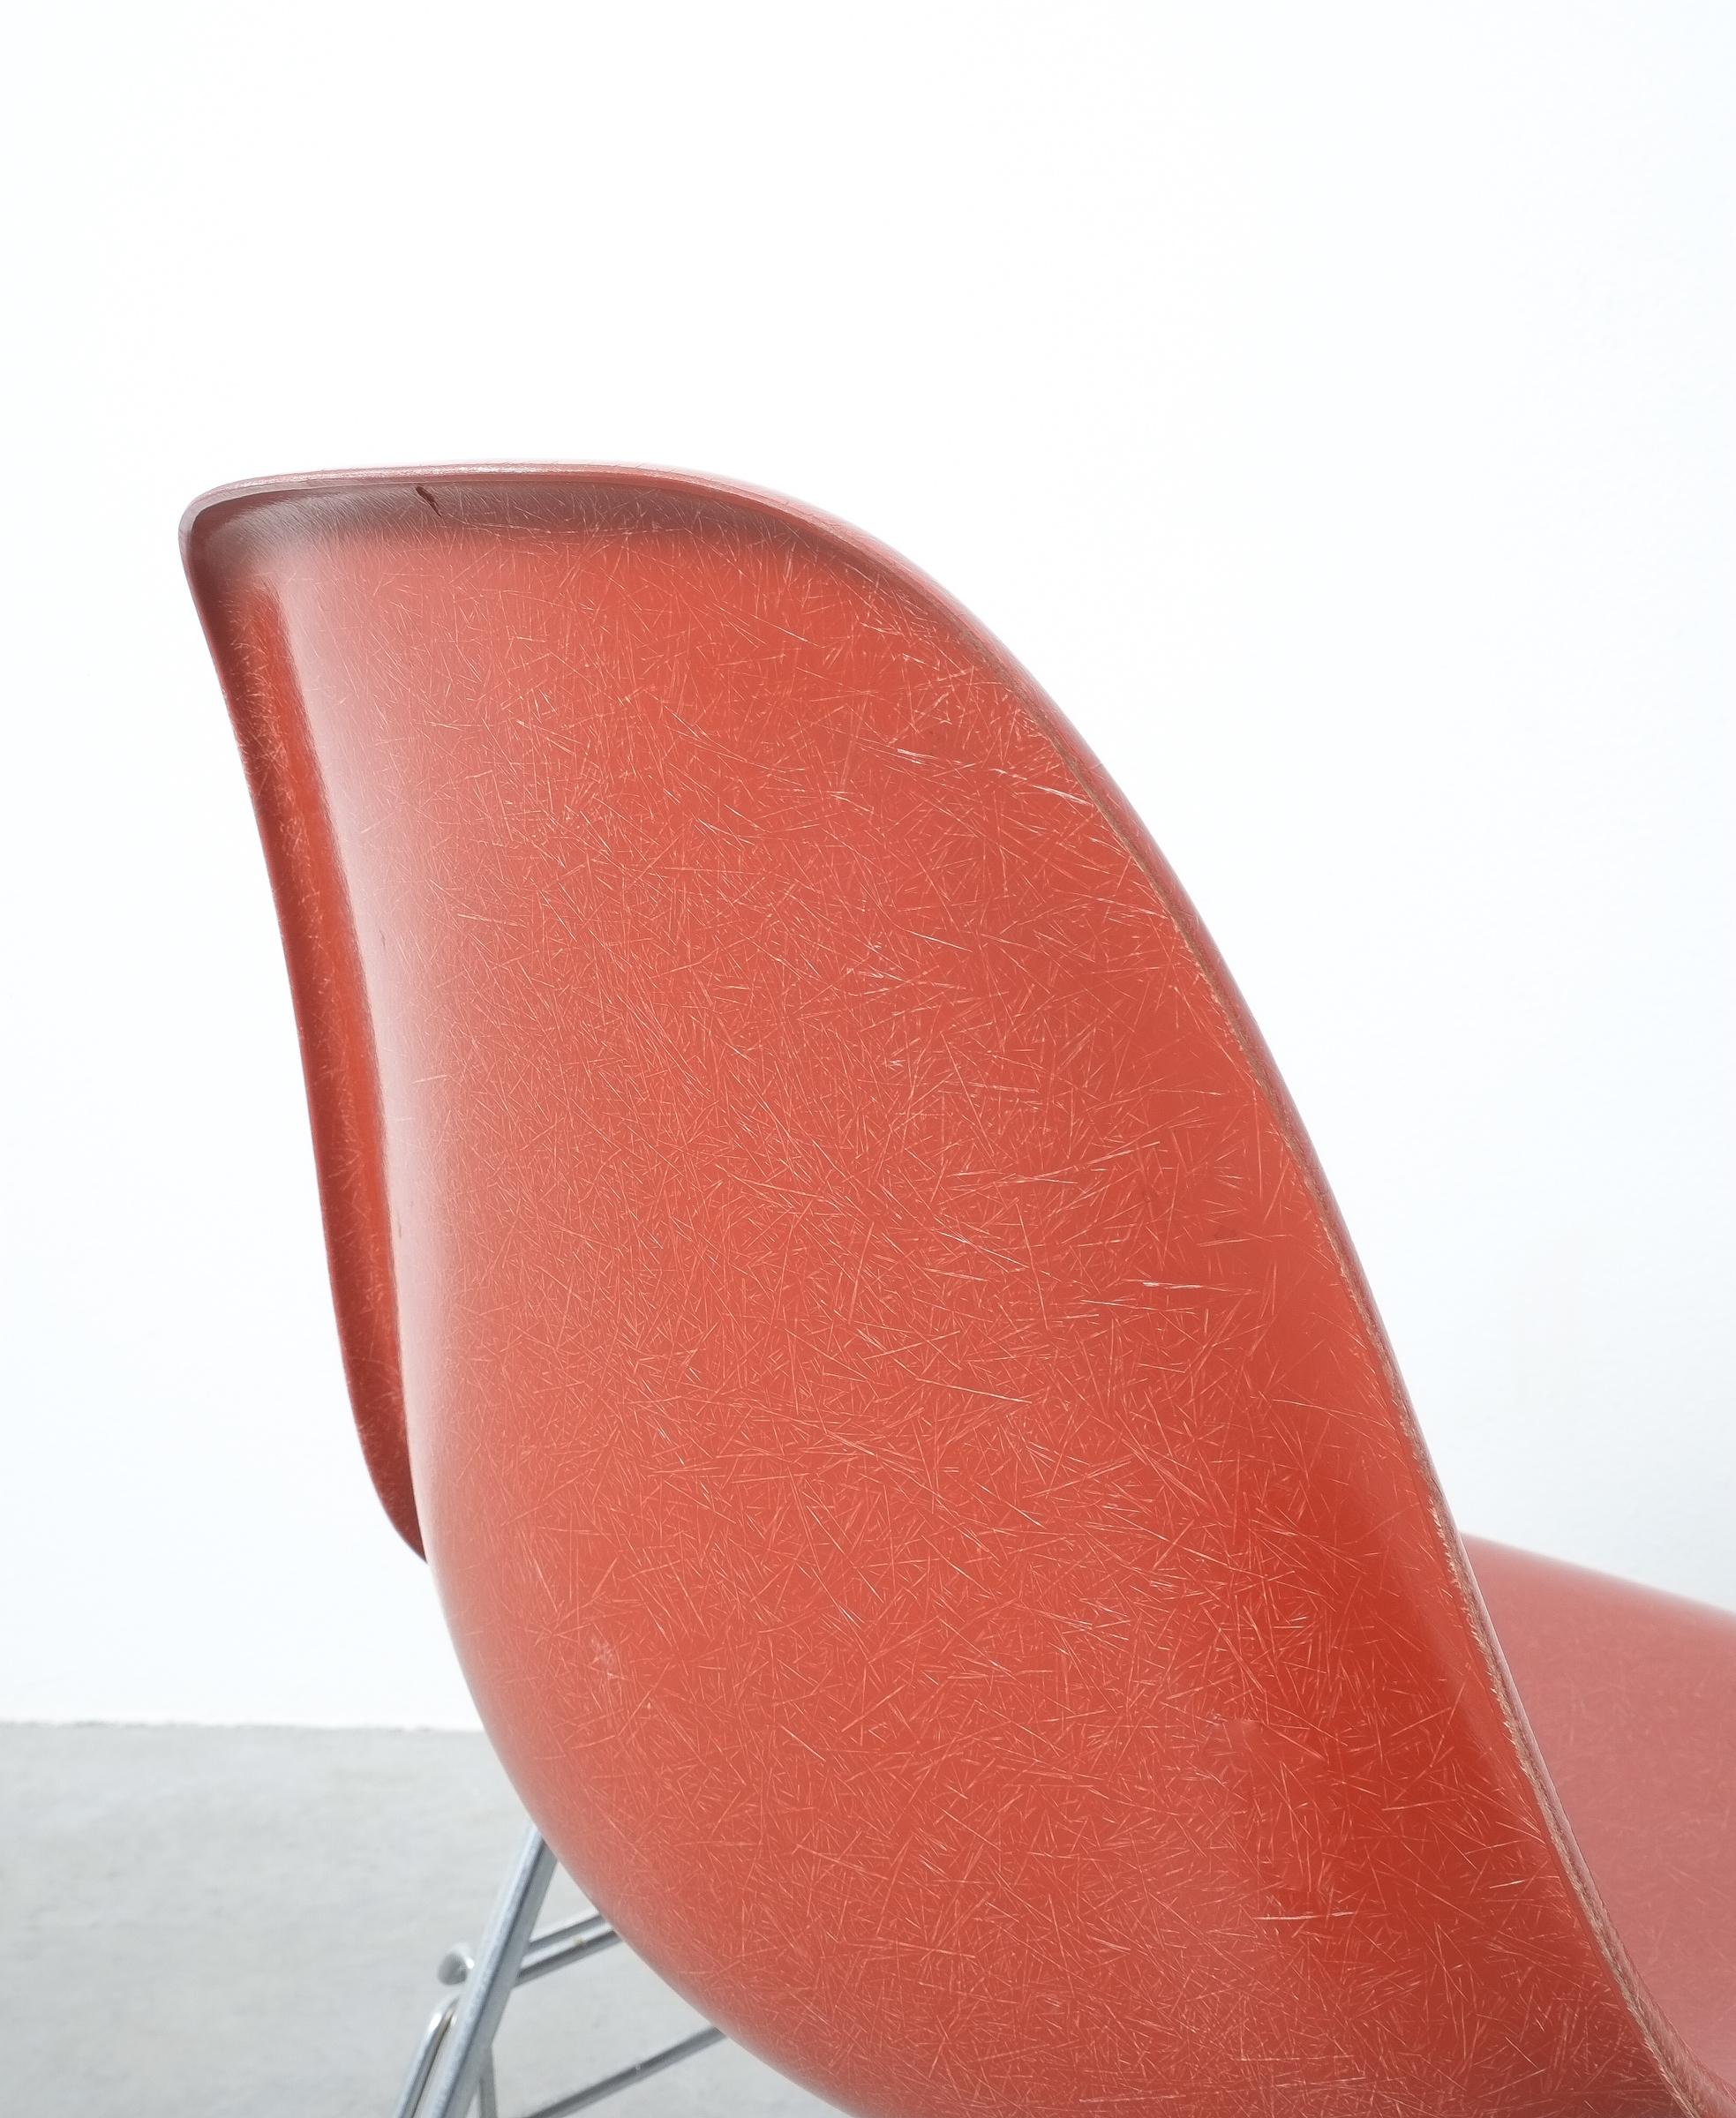 Dyed Herman Miller Eames Dining Chairs Terracotta, circa 1970